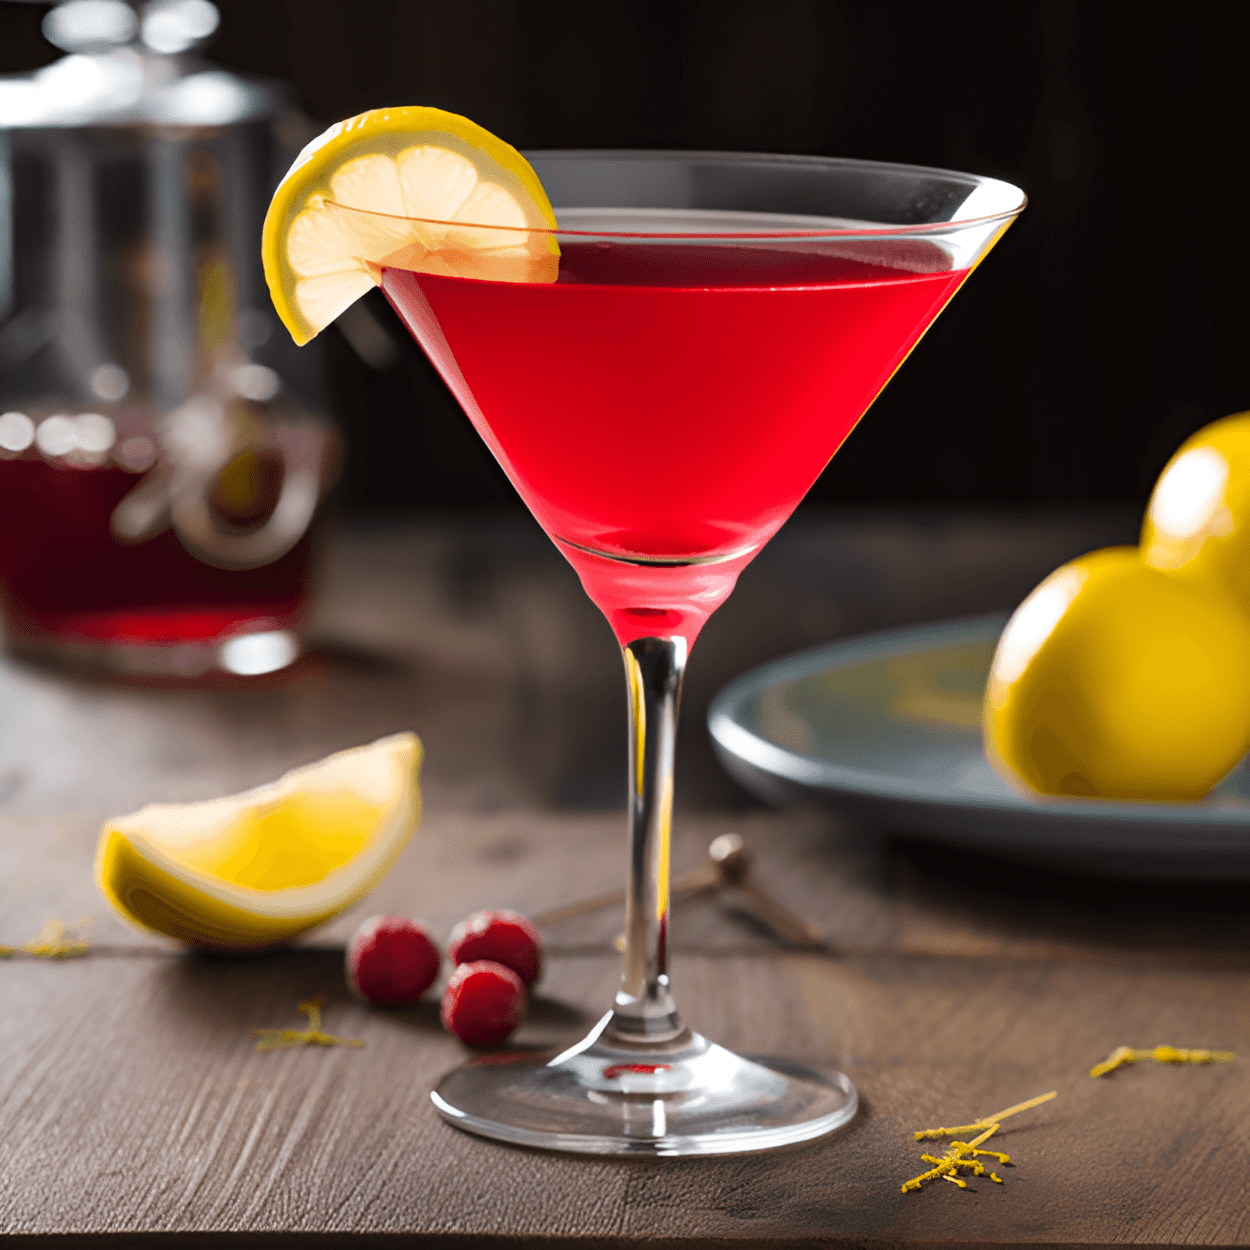 Wonder Woman Cocktail Recipe - The Wonder Woman cocktail is a powerful blend of sweet and sour, with a strong kick of alcohol. It's fruity, tangy, and slightly sweet, with a vibrant red color that matches Wonder Woman's iconic outfit.